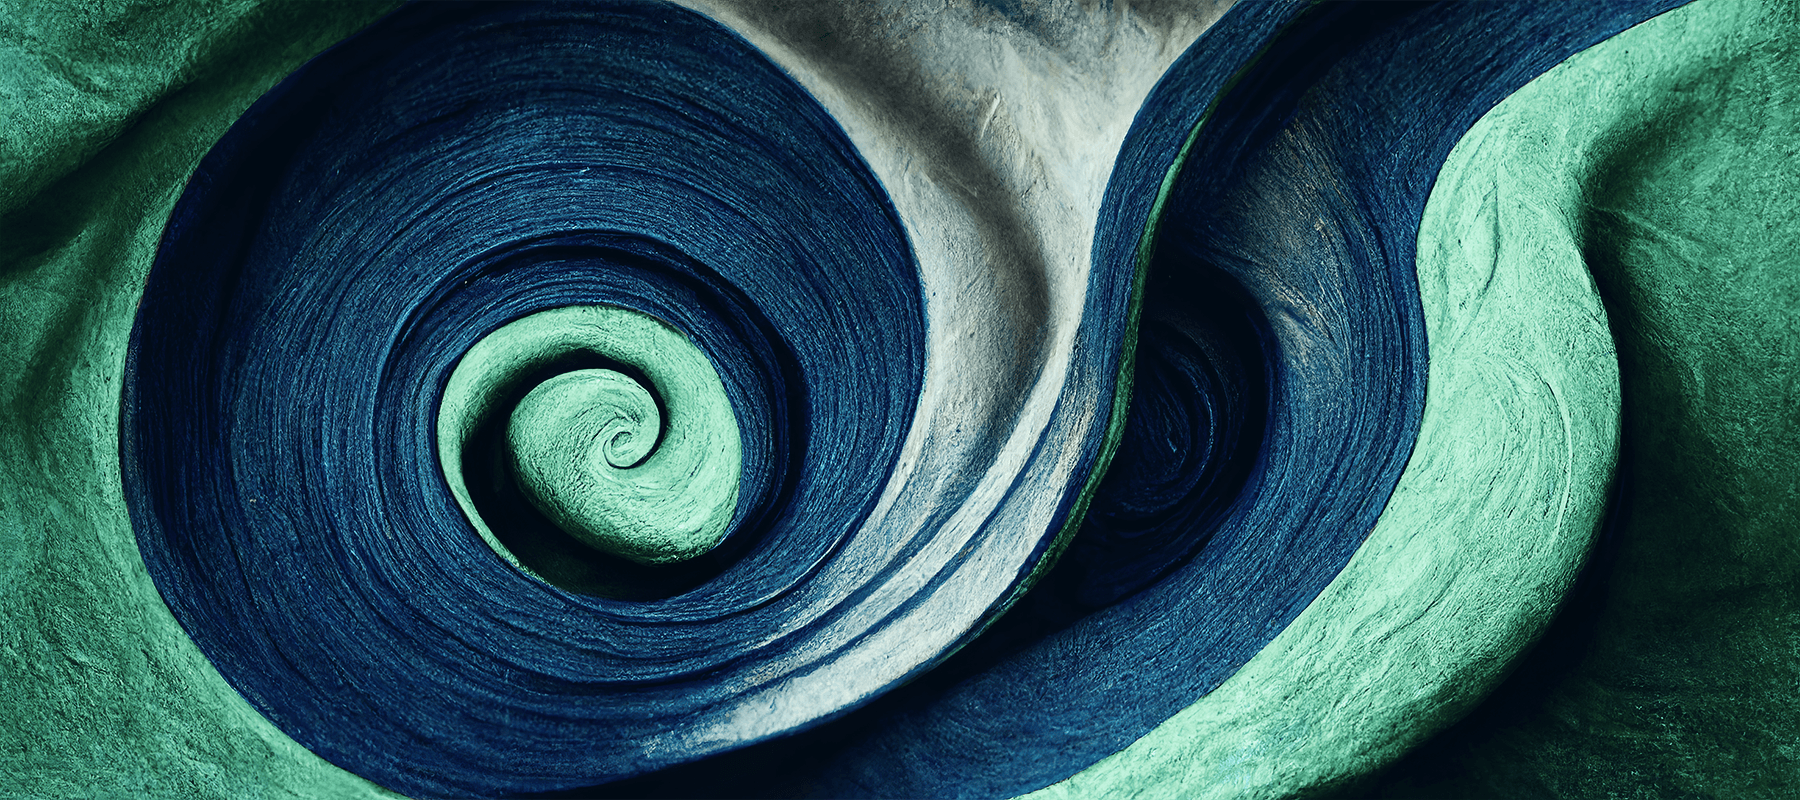 blue and green swirling colors